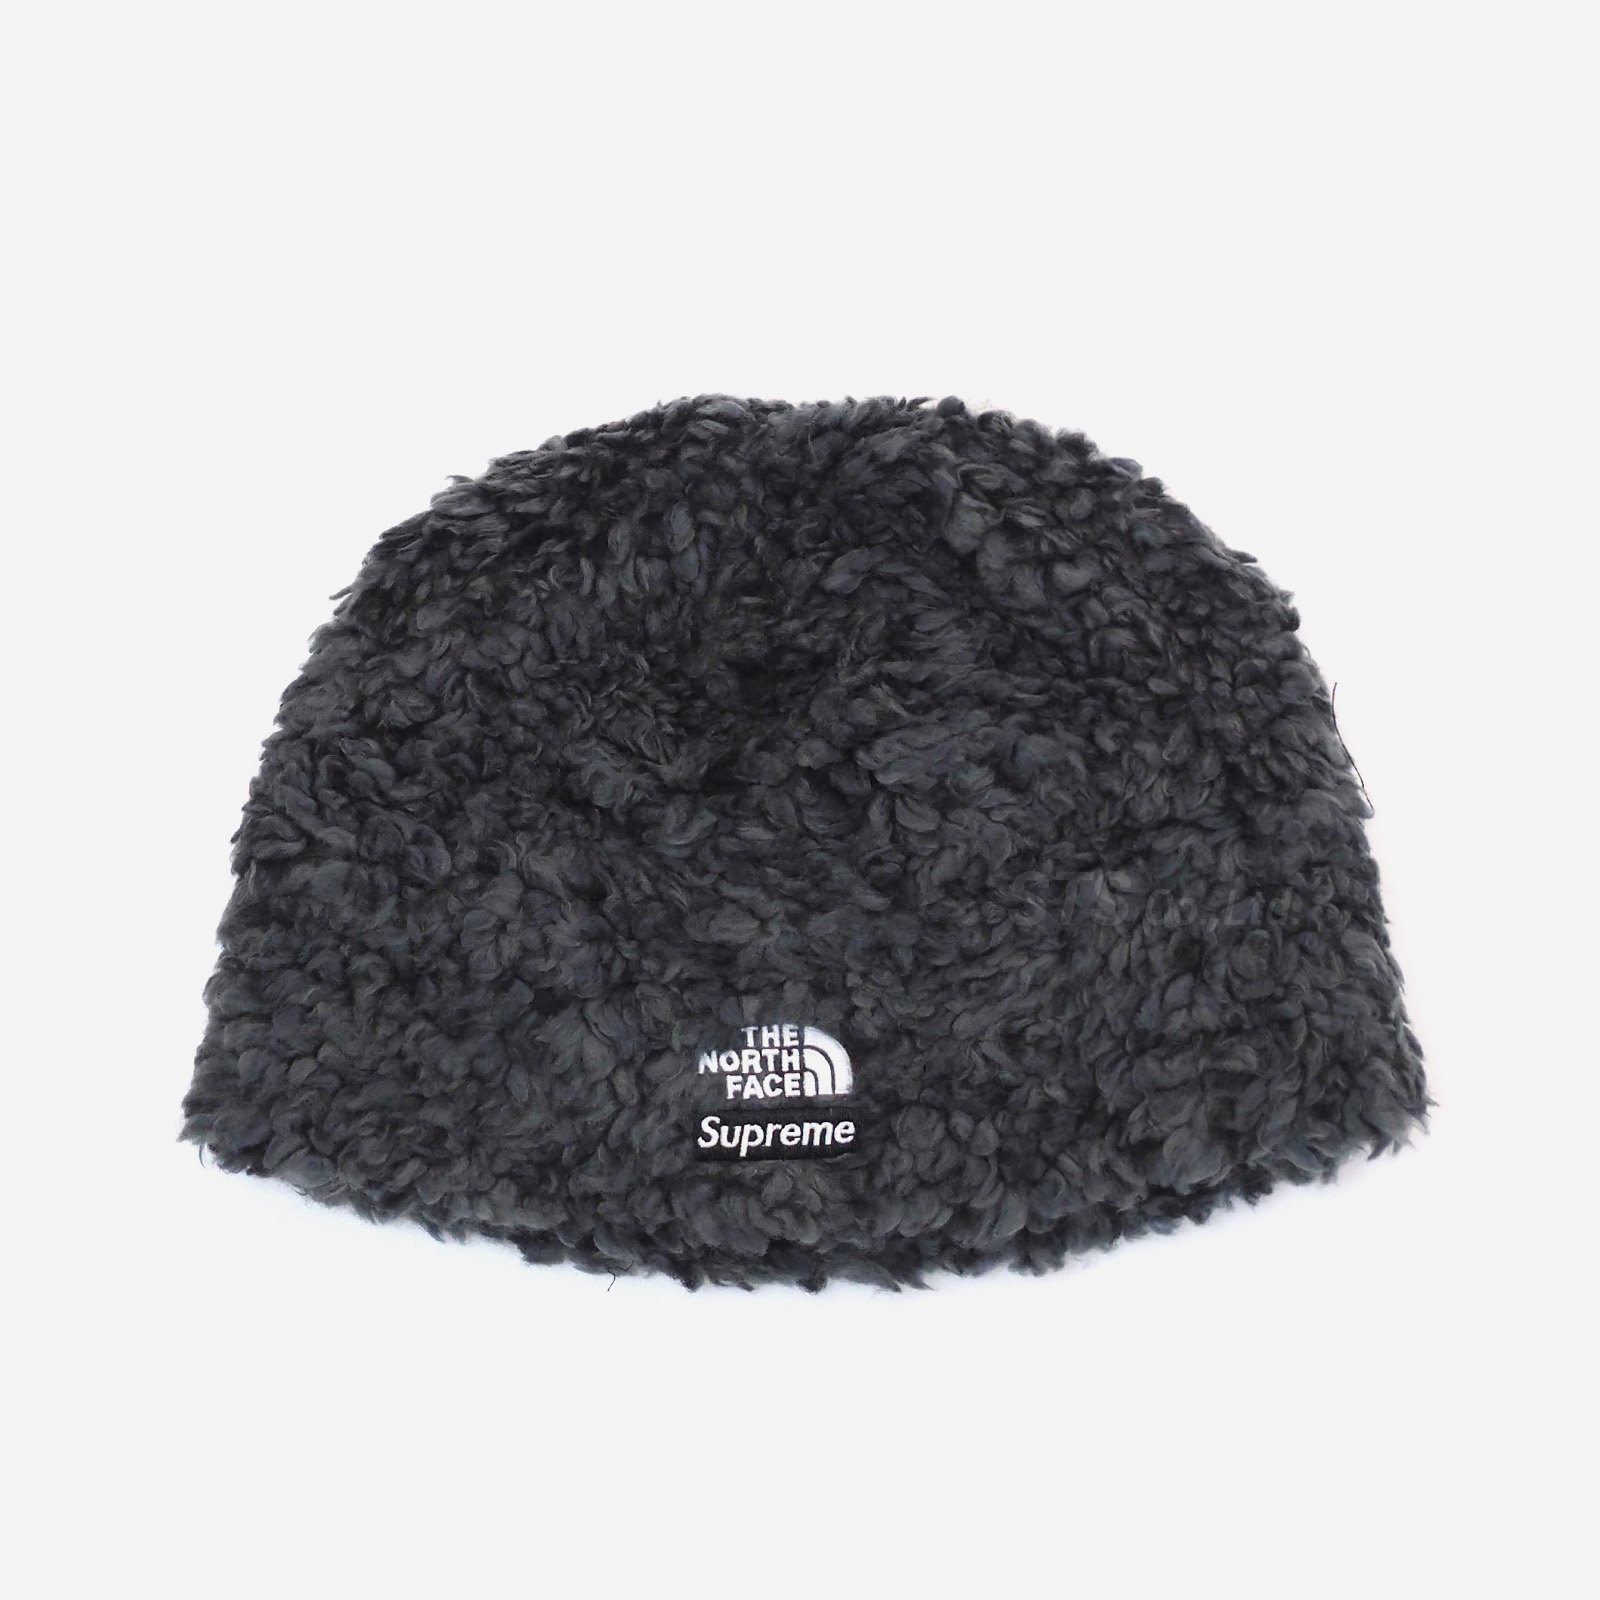 Supreme/The North Face High Pile Fleece Beanie - ParkSIDER